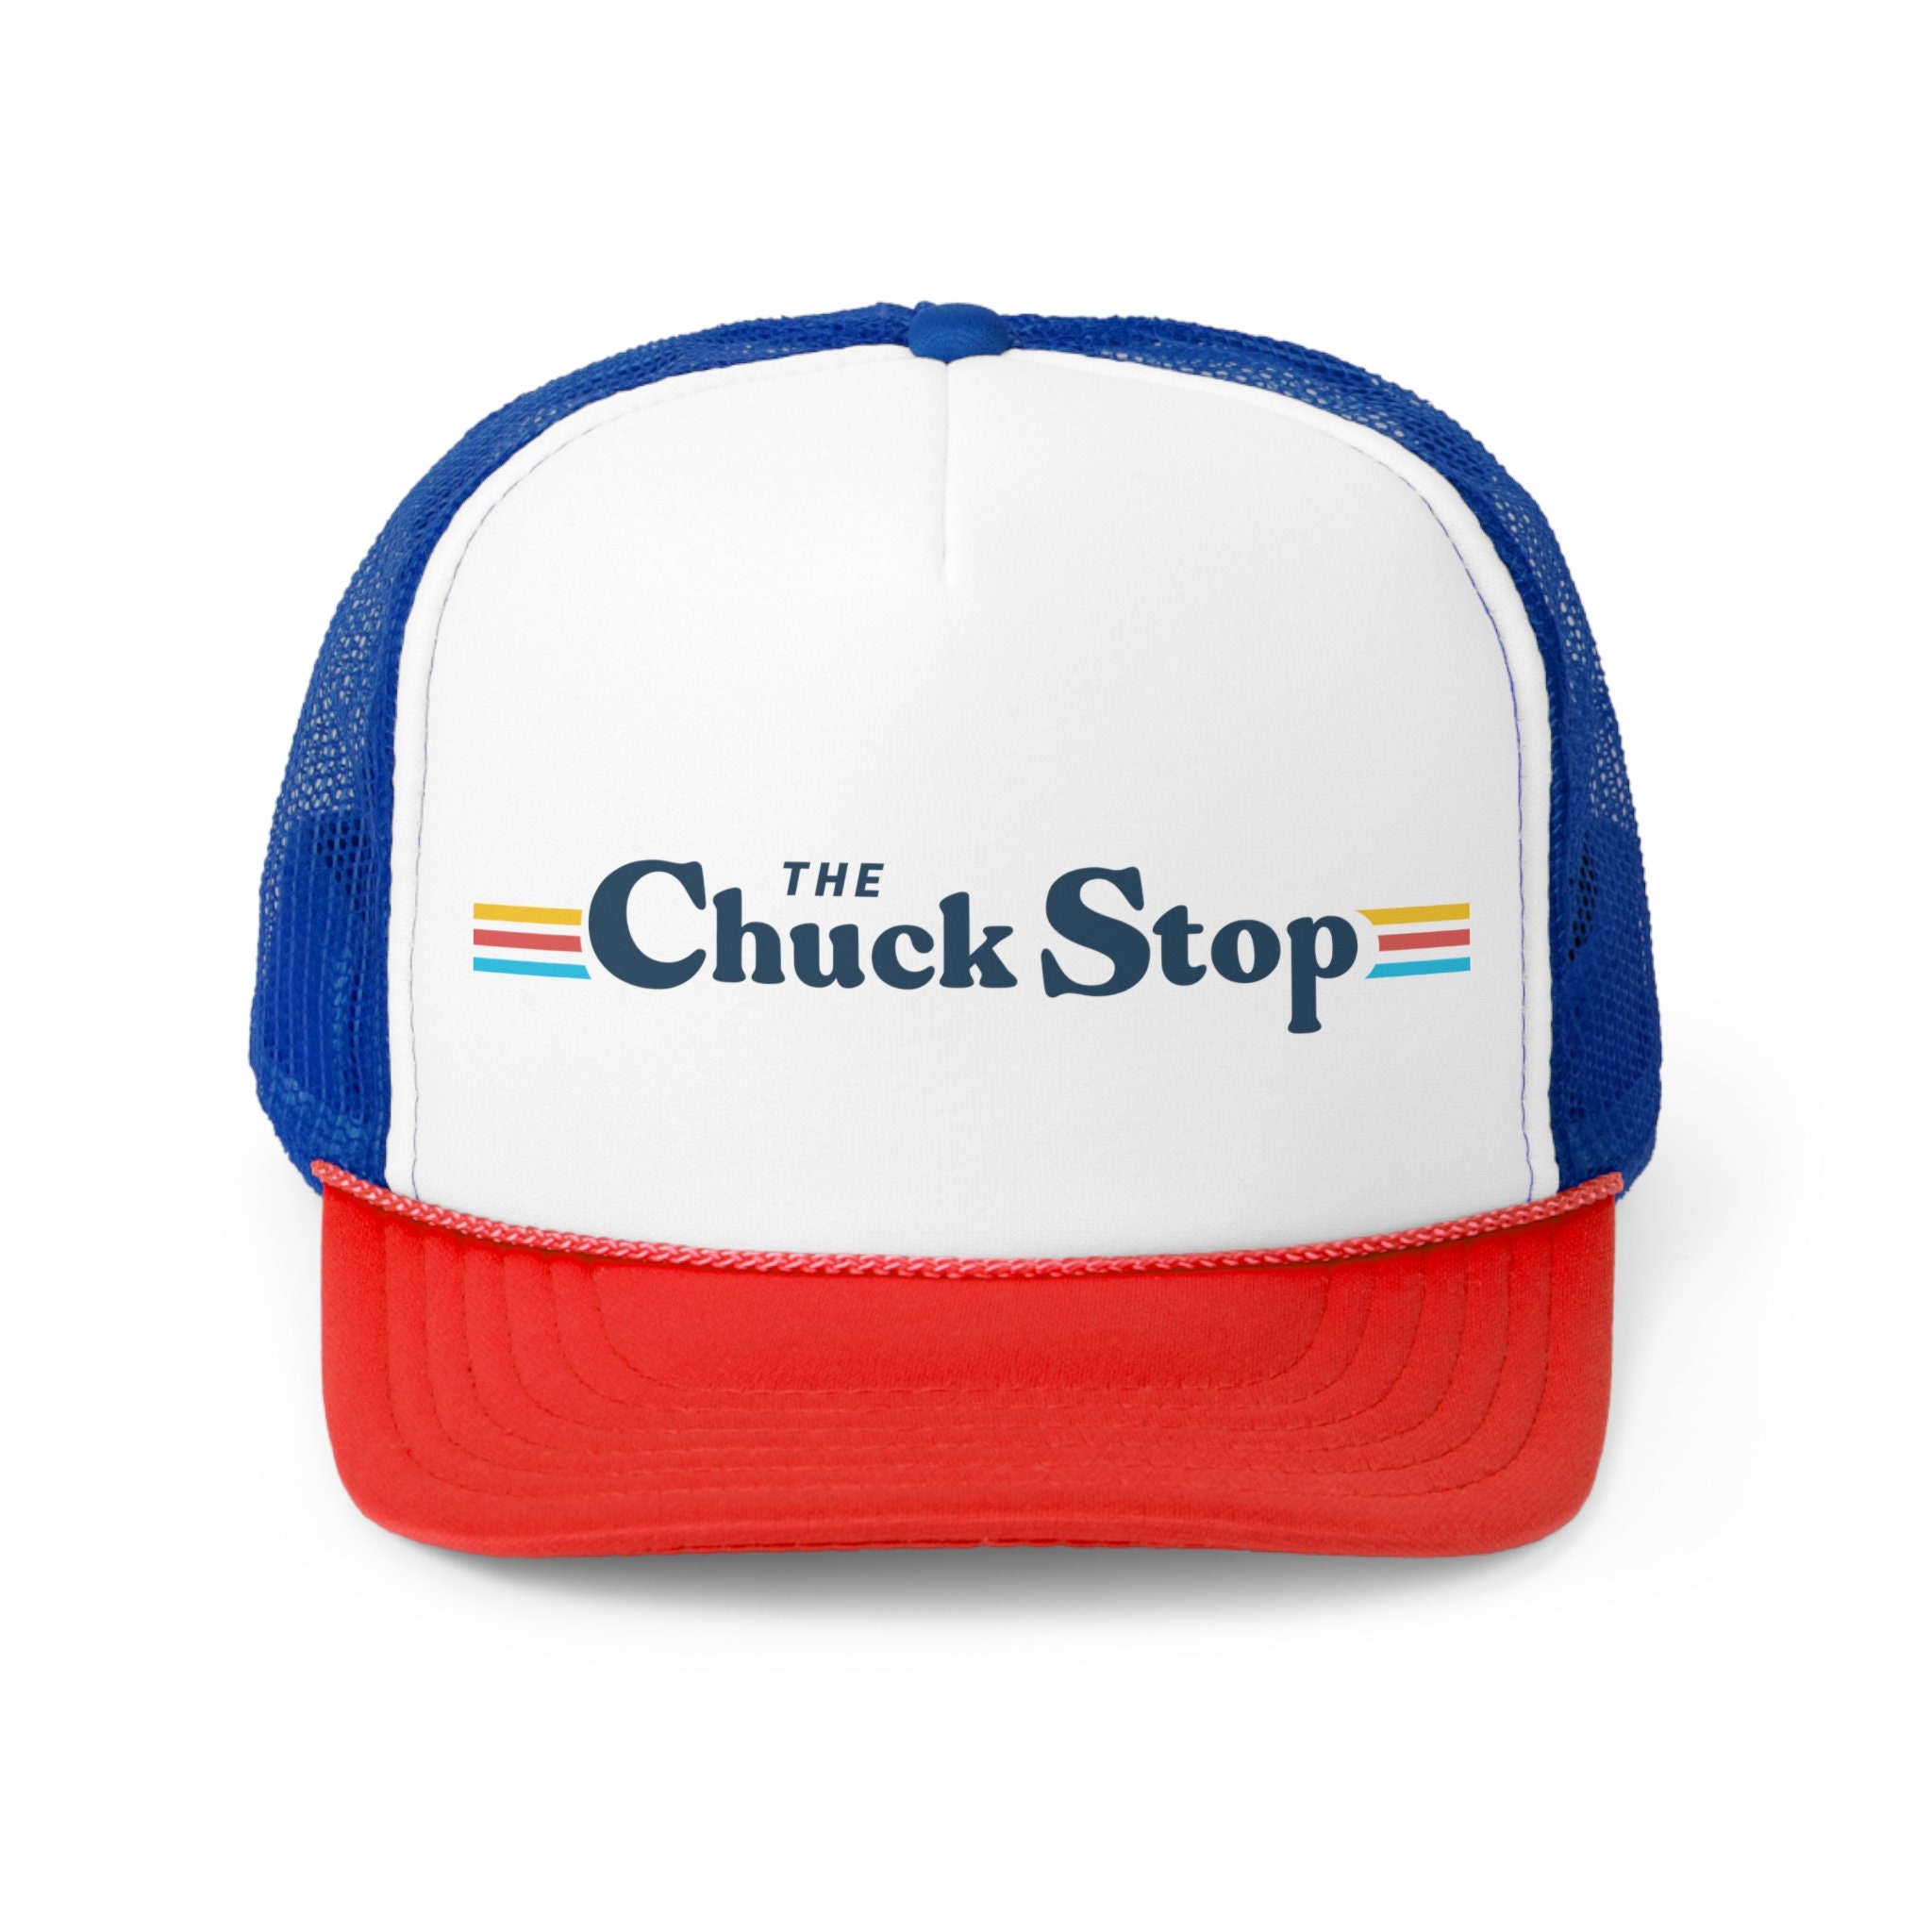 The Chuck Stop Charles Barkley Capital One March Madness Trucker Hat  Chucker Hat 